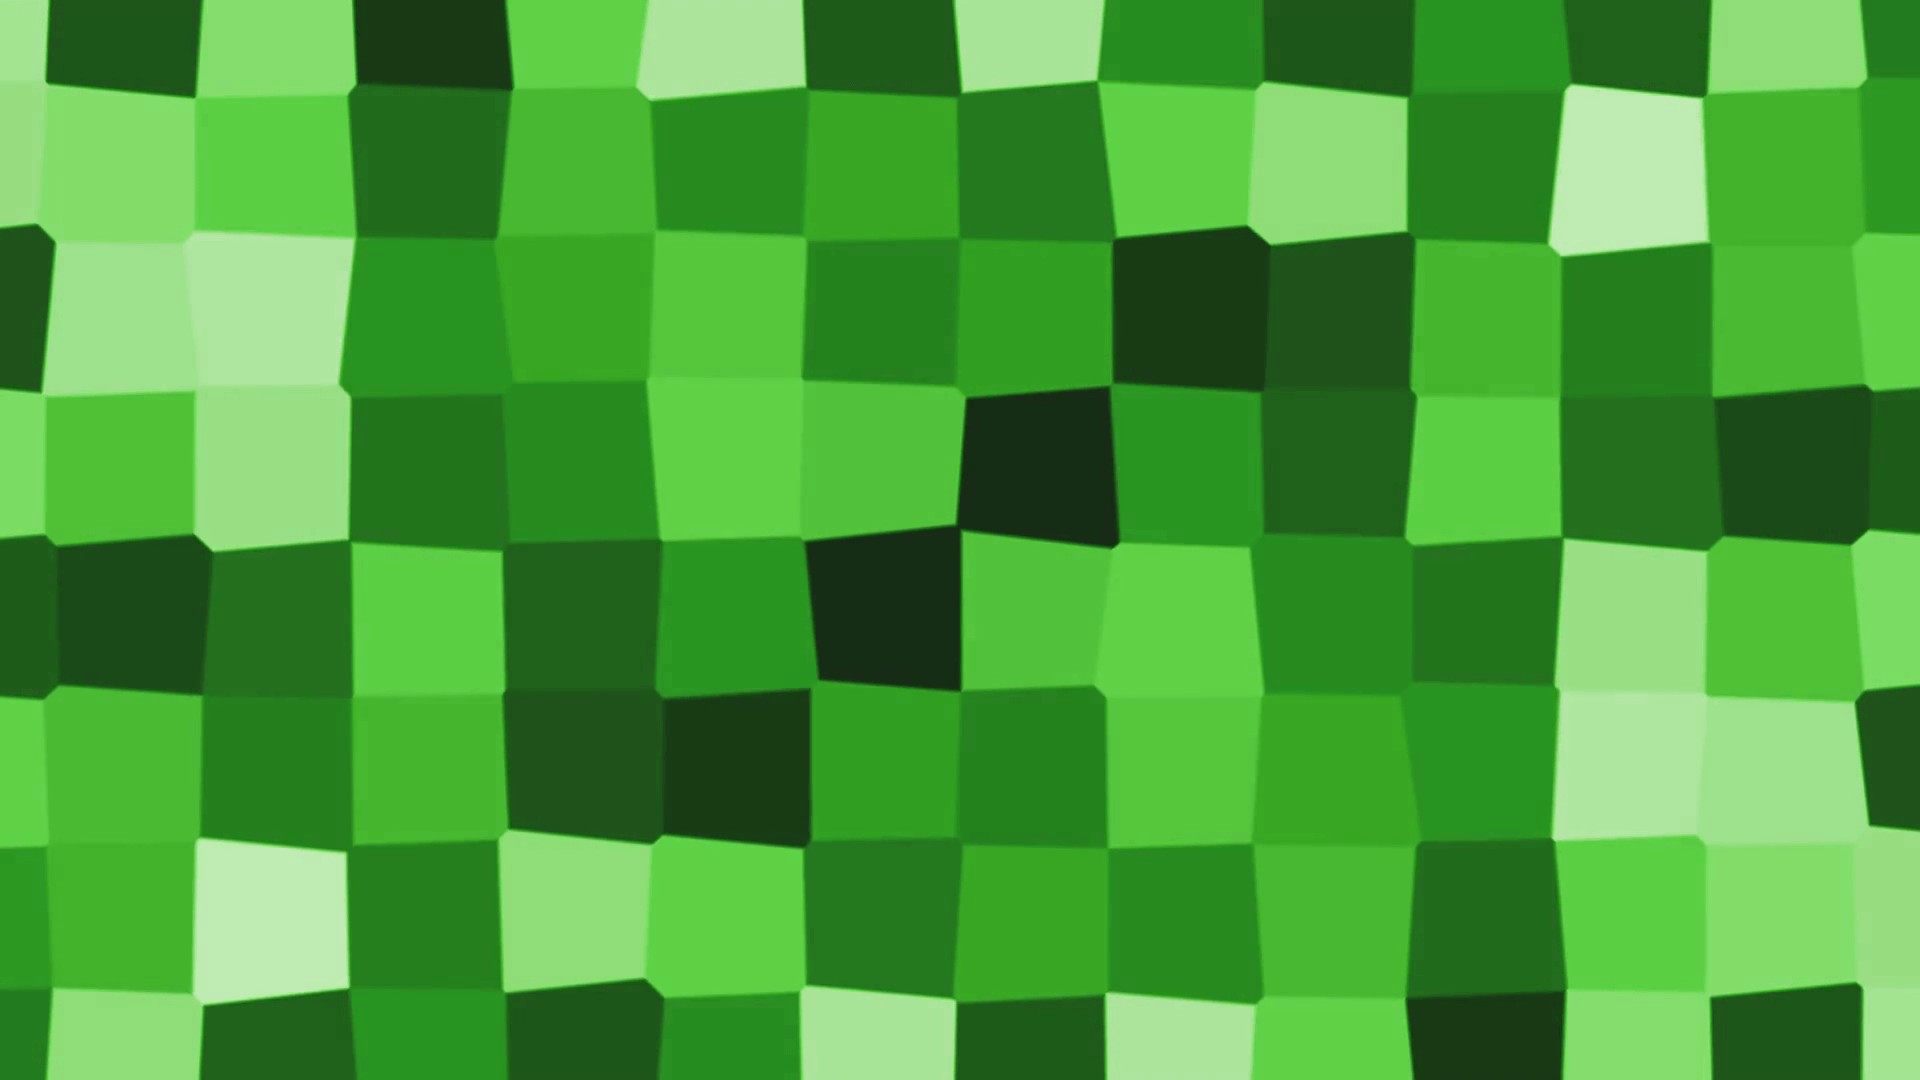 Backgrounds Minecraft - Wallpaper Cave